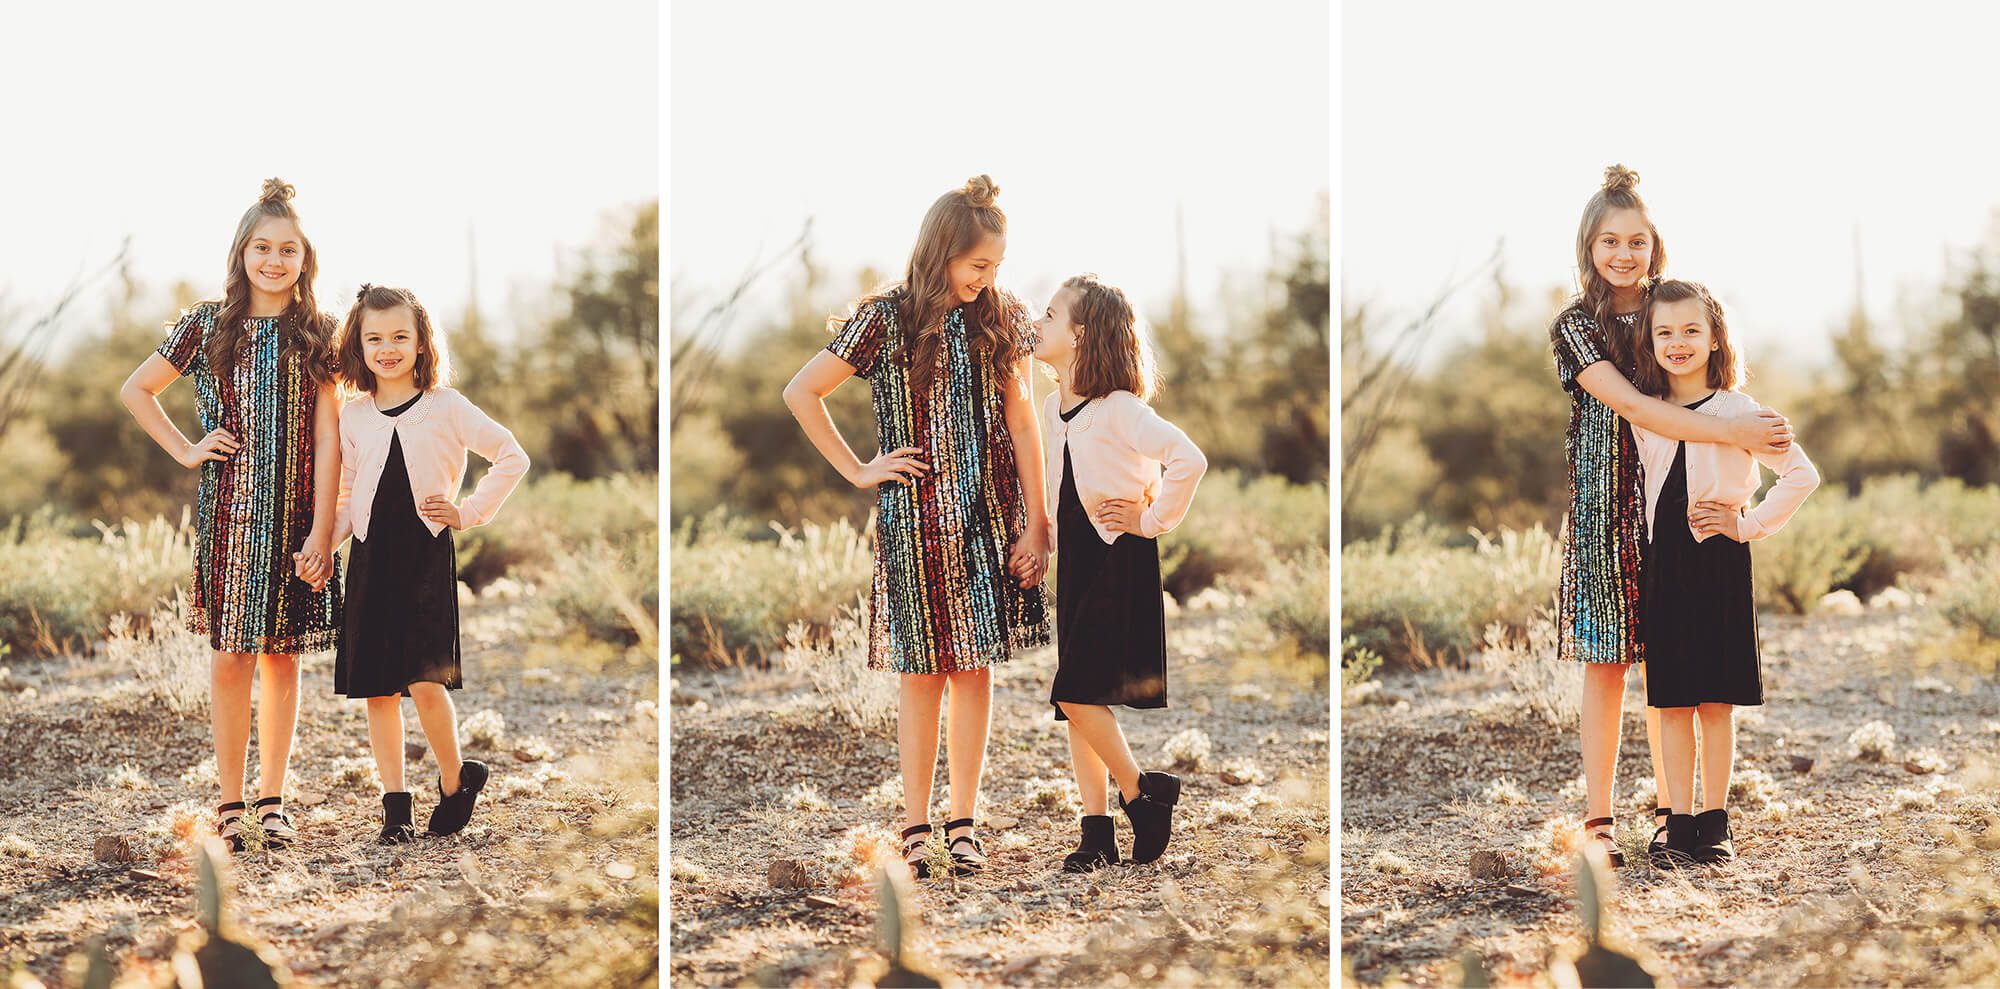 The Gunter sisters hugging and laughing with the setting sun behind them during their family photo session in the desert just outside Tucson